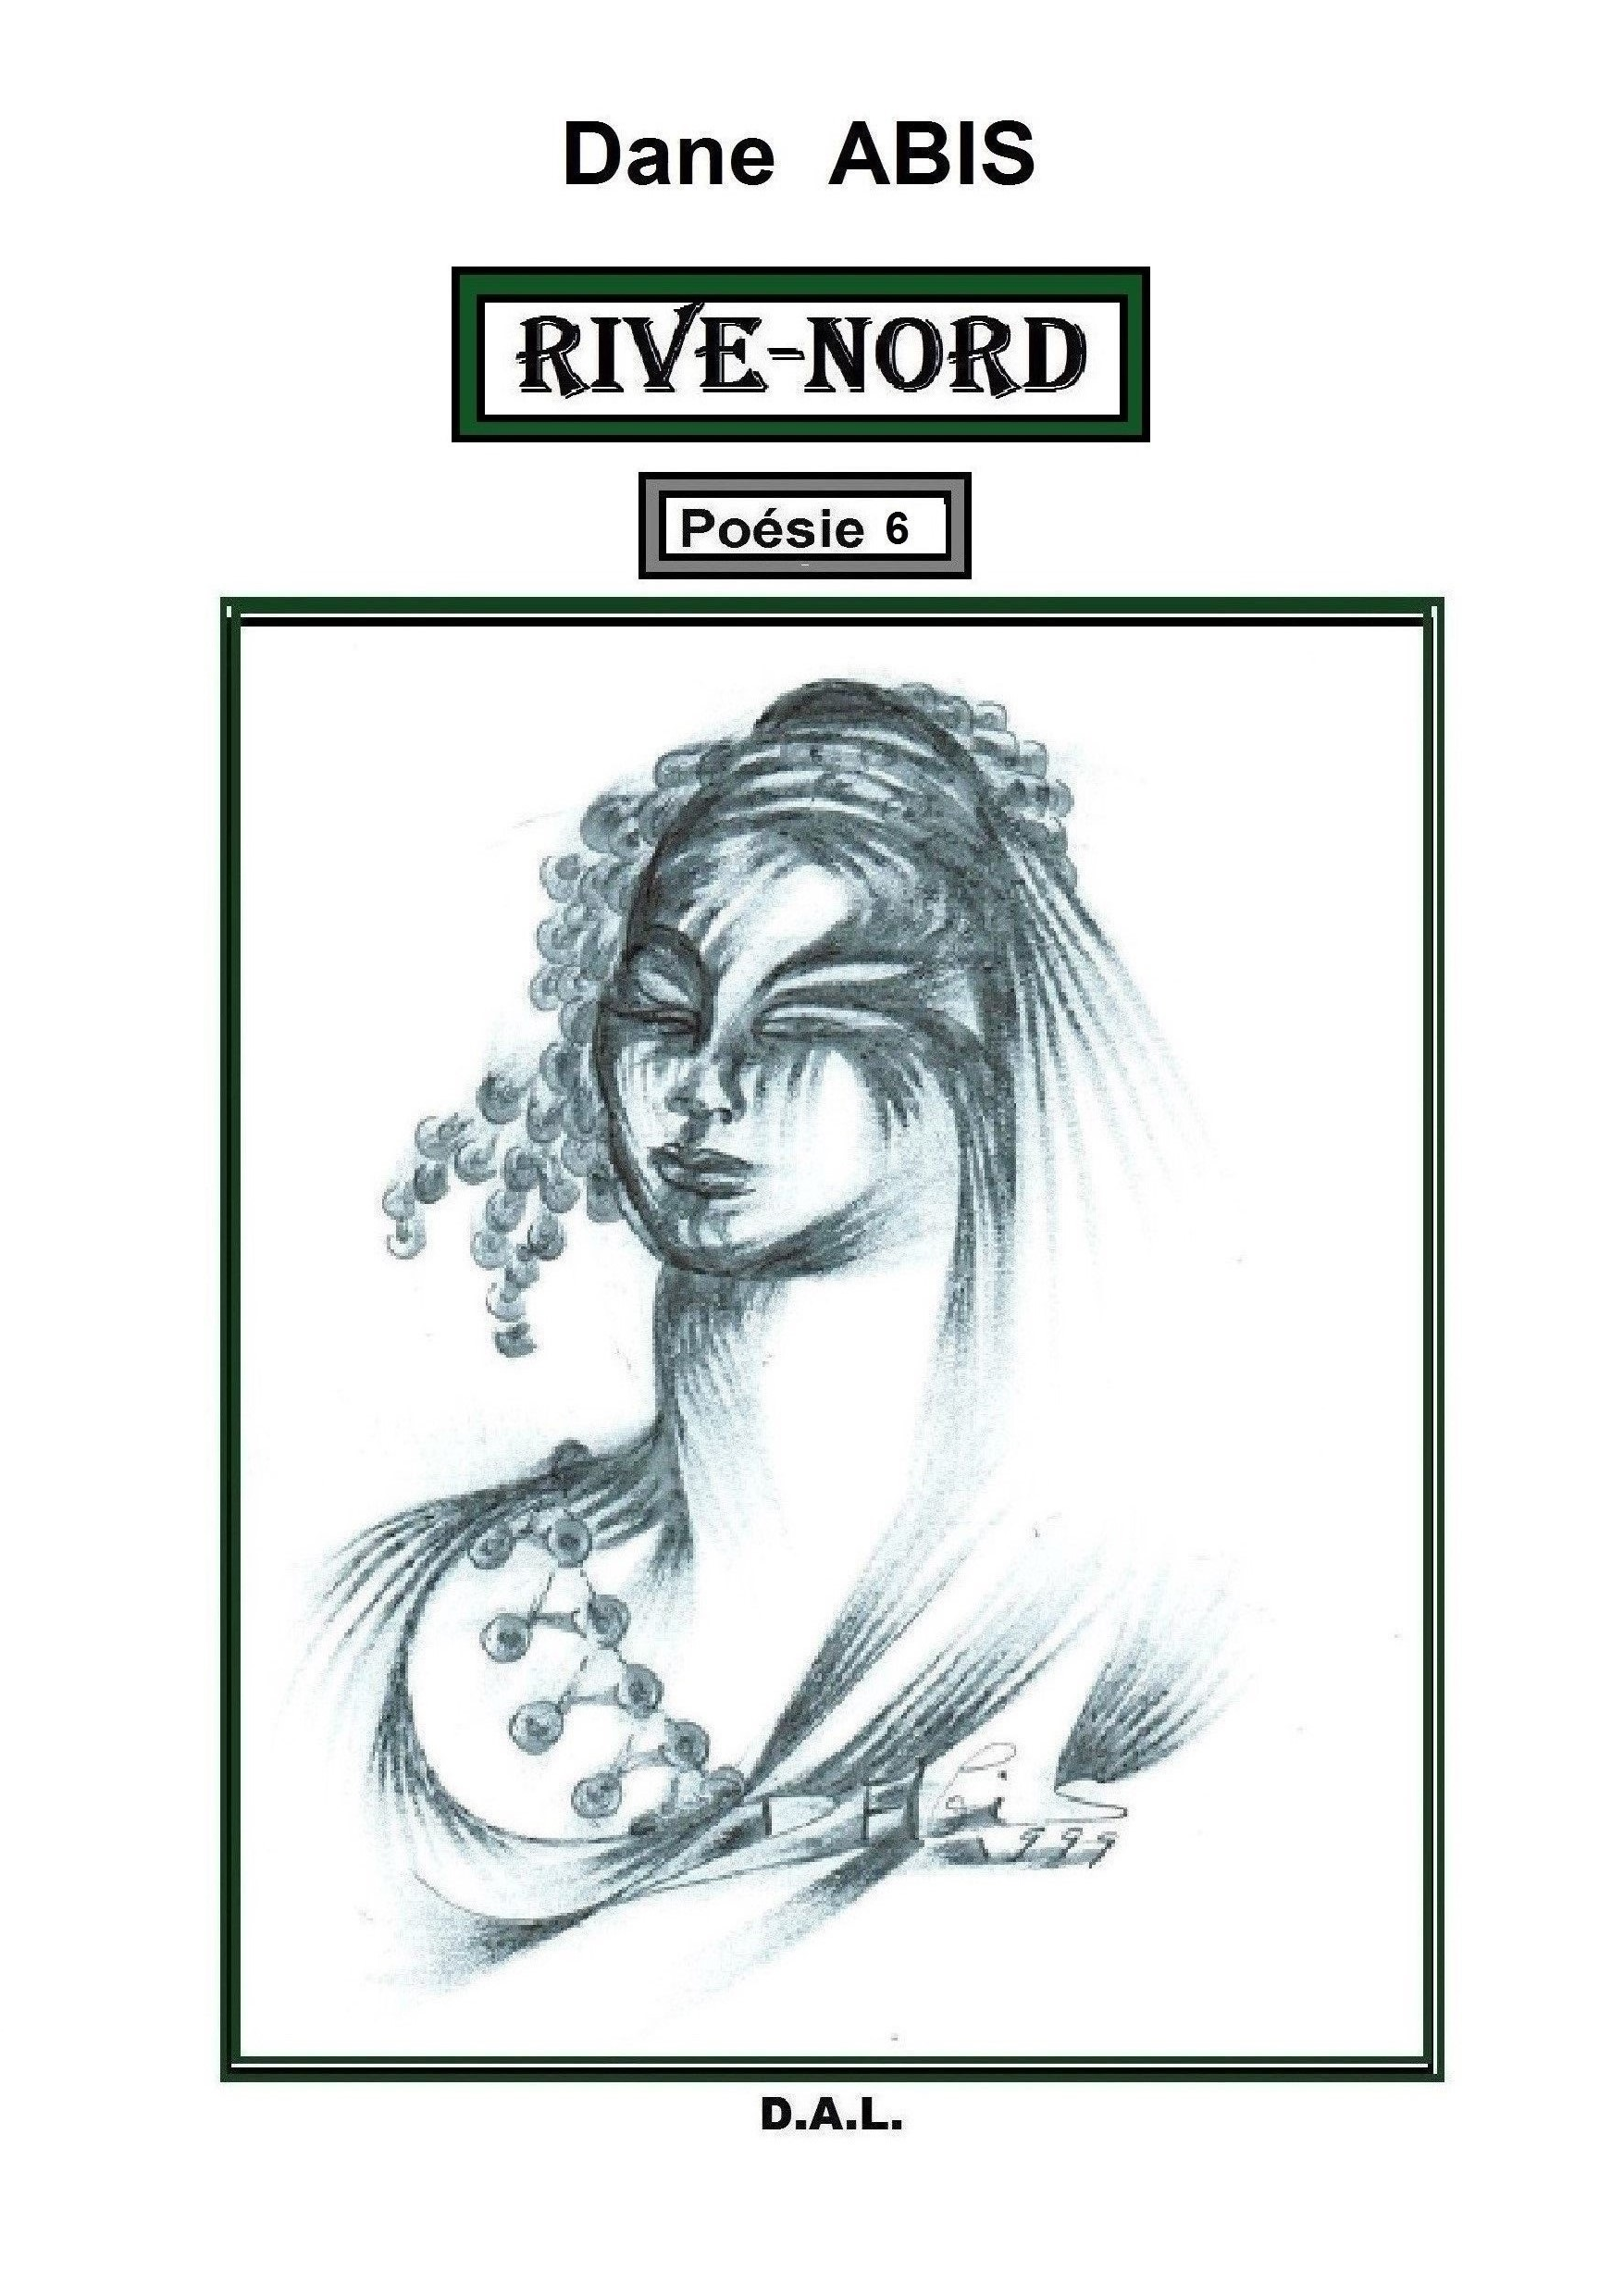 RIVE-NORD